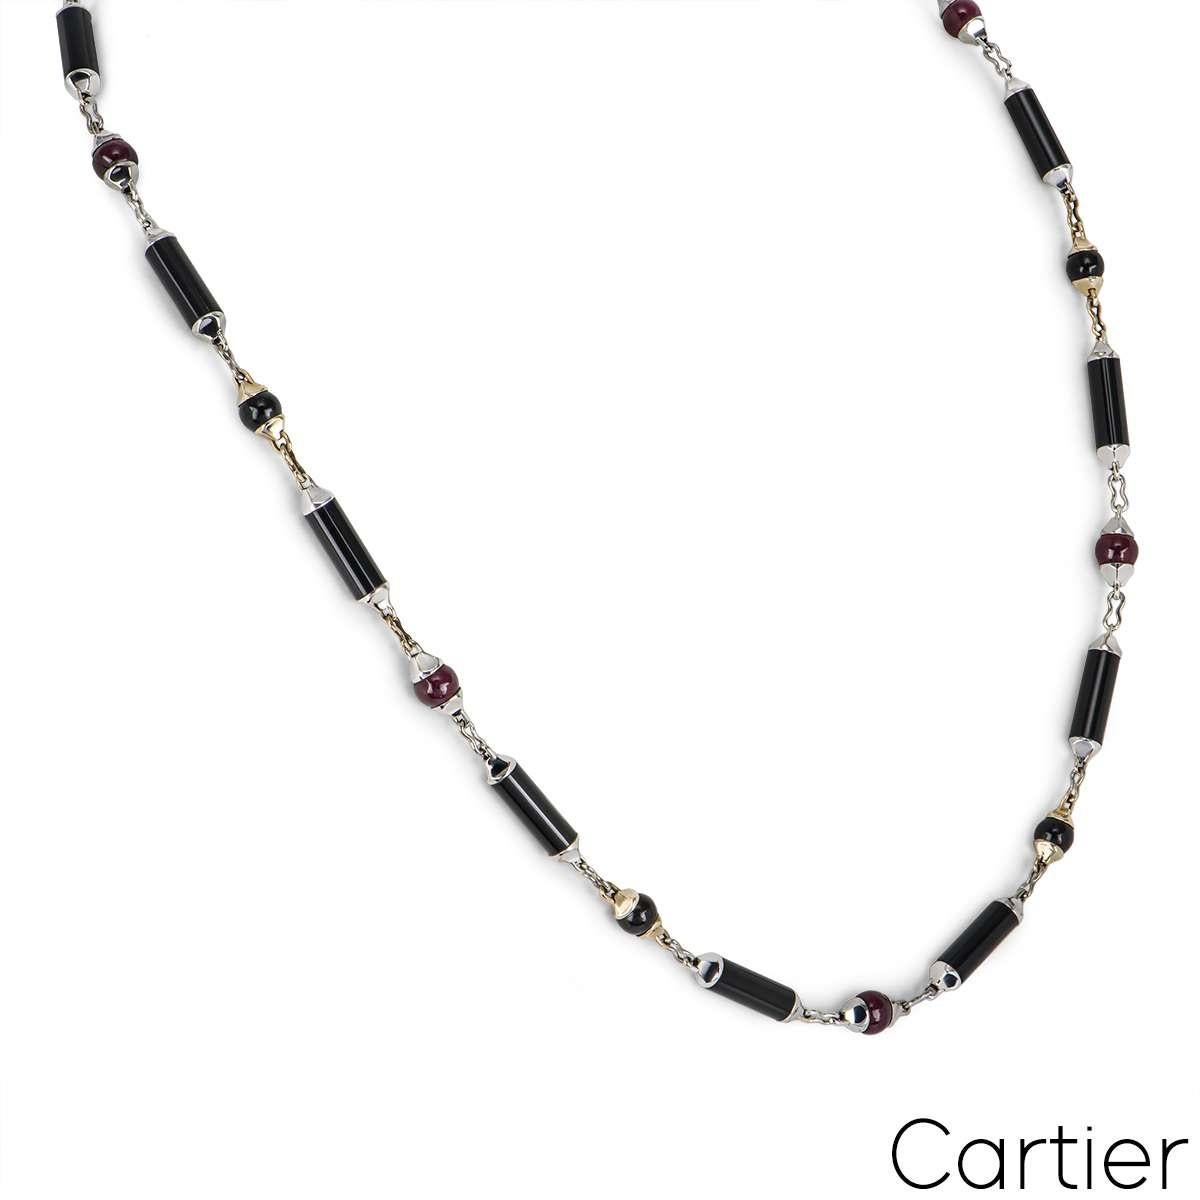 A unique 18k white and yellow gold onyx and ruby Cartier necklace from the Le Baiser Du Dragon collection. The necklace comprises of 13 cylinder bar motifs all featuring onyx inlays, alternating in between we have 6 cabochon cut rubies set in white